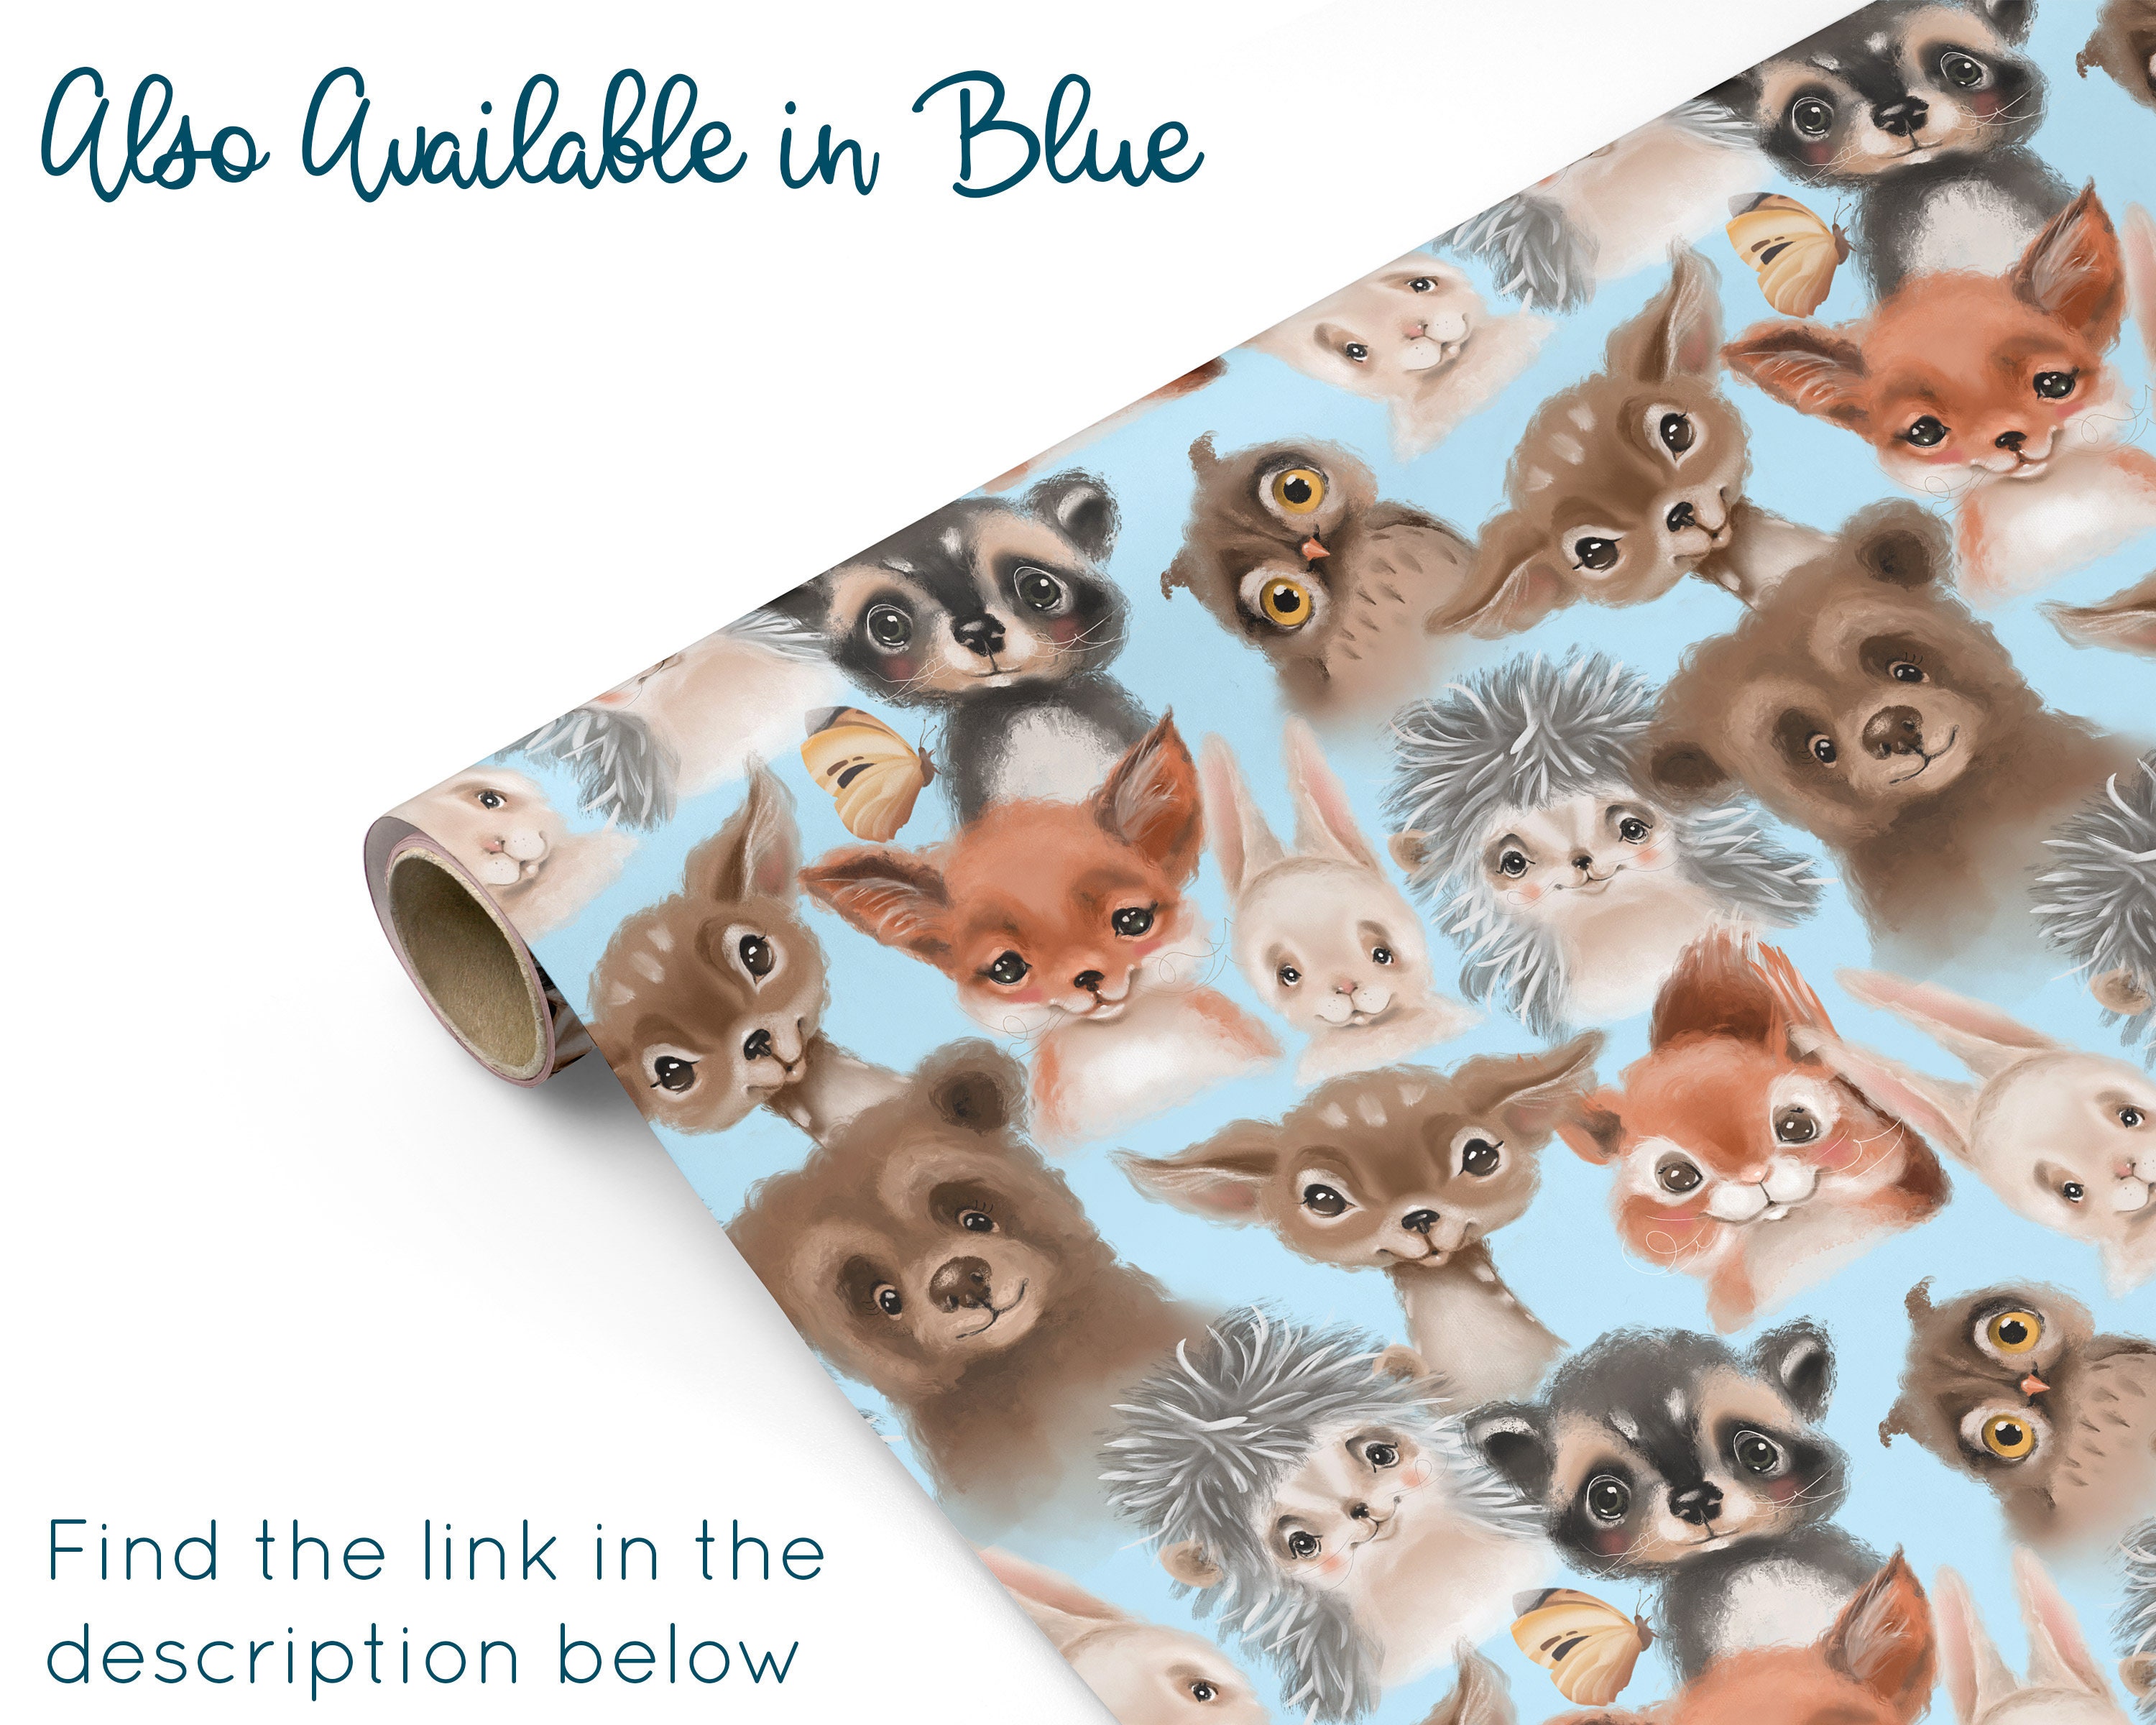 Pink Floral Woodland Animals WRAPPING PAPER With Fox, Owl, Deer, Bear,  Rabbit, Squirrel, Hedgehog & Raccoon Woodland Baby Shower 